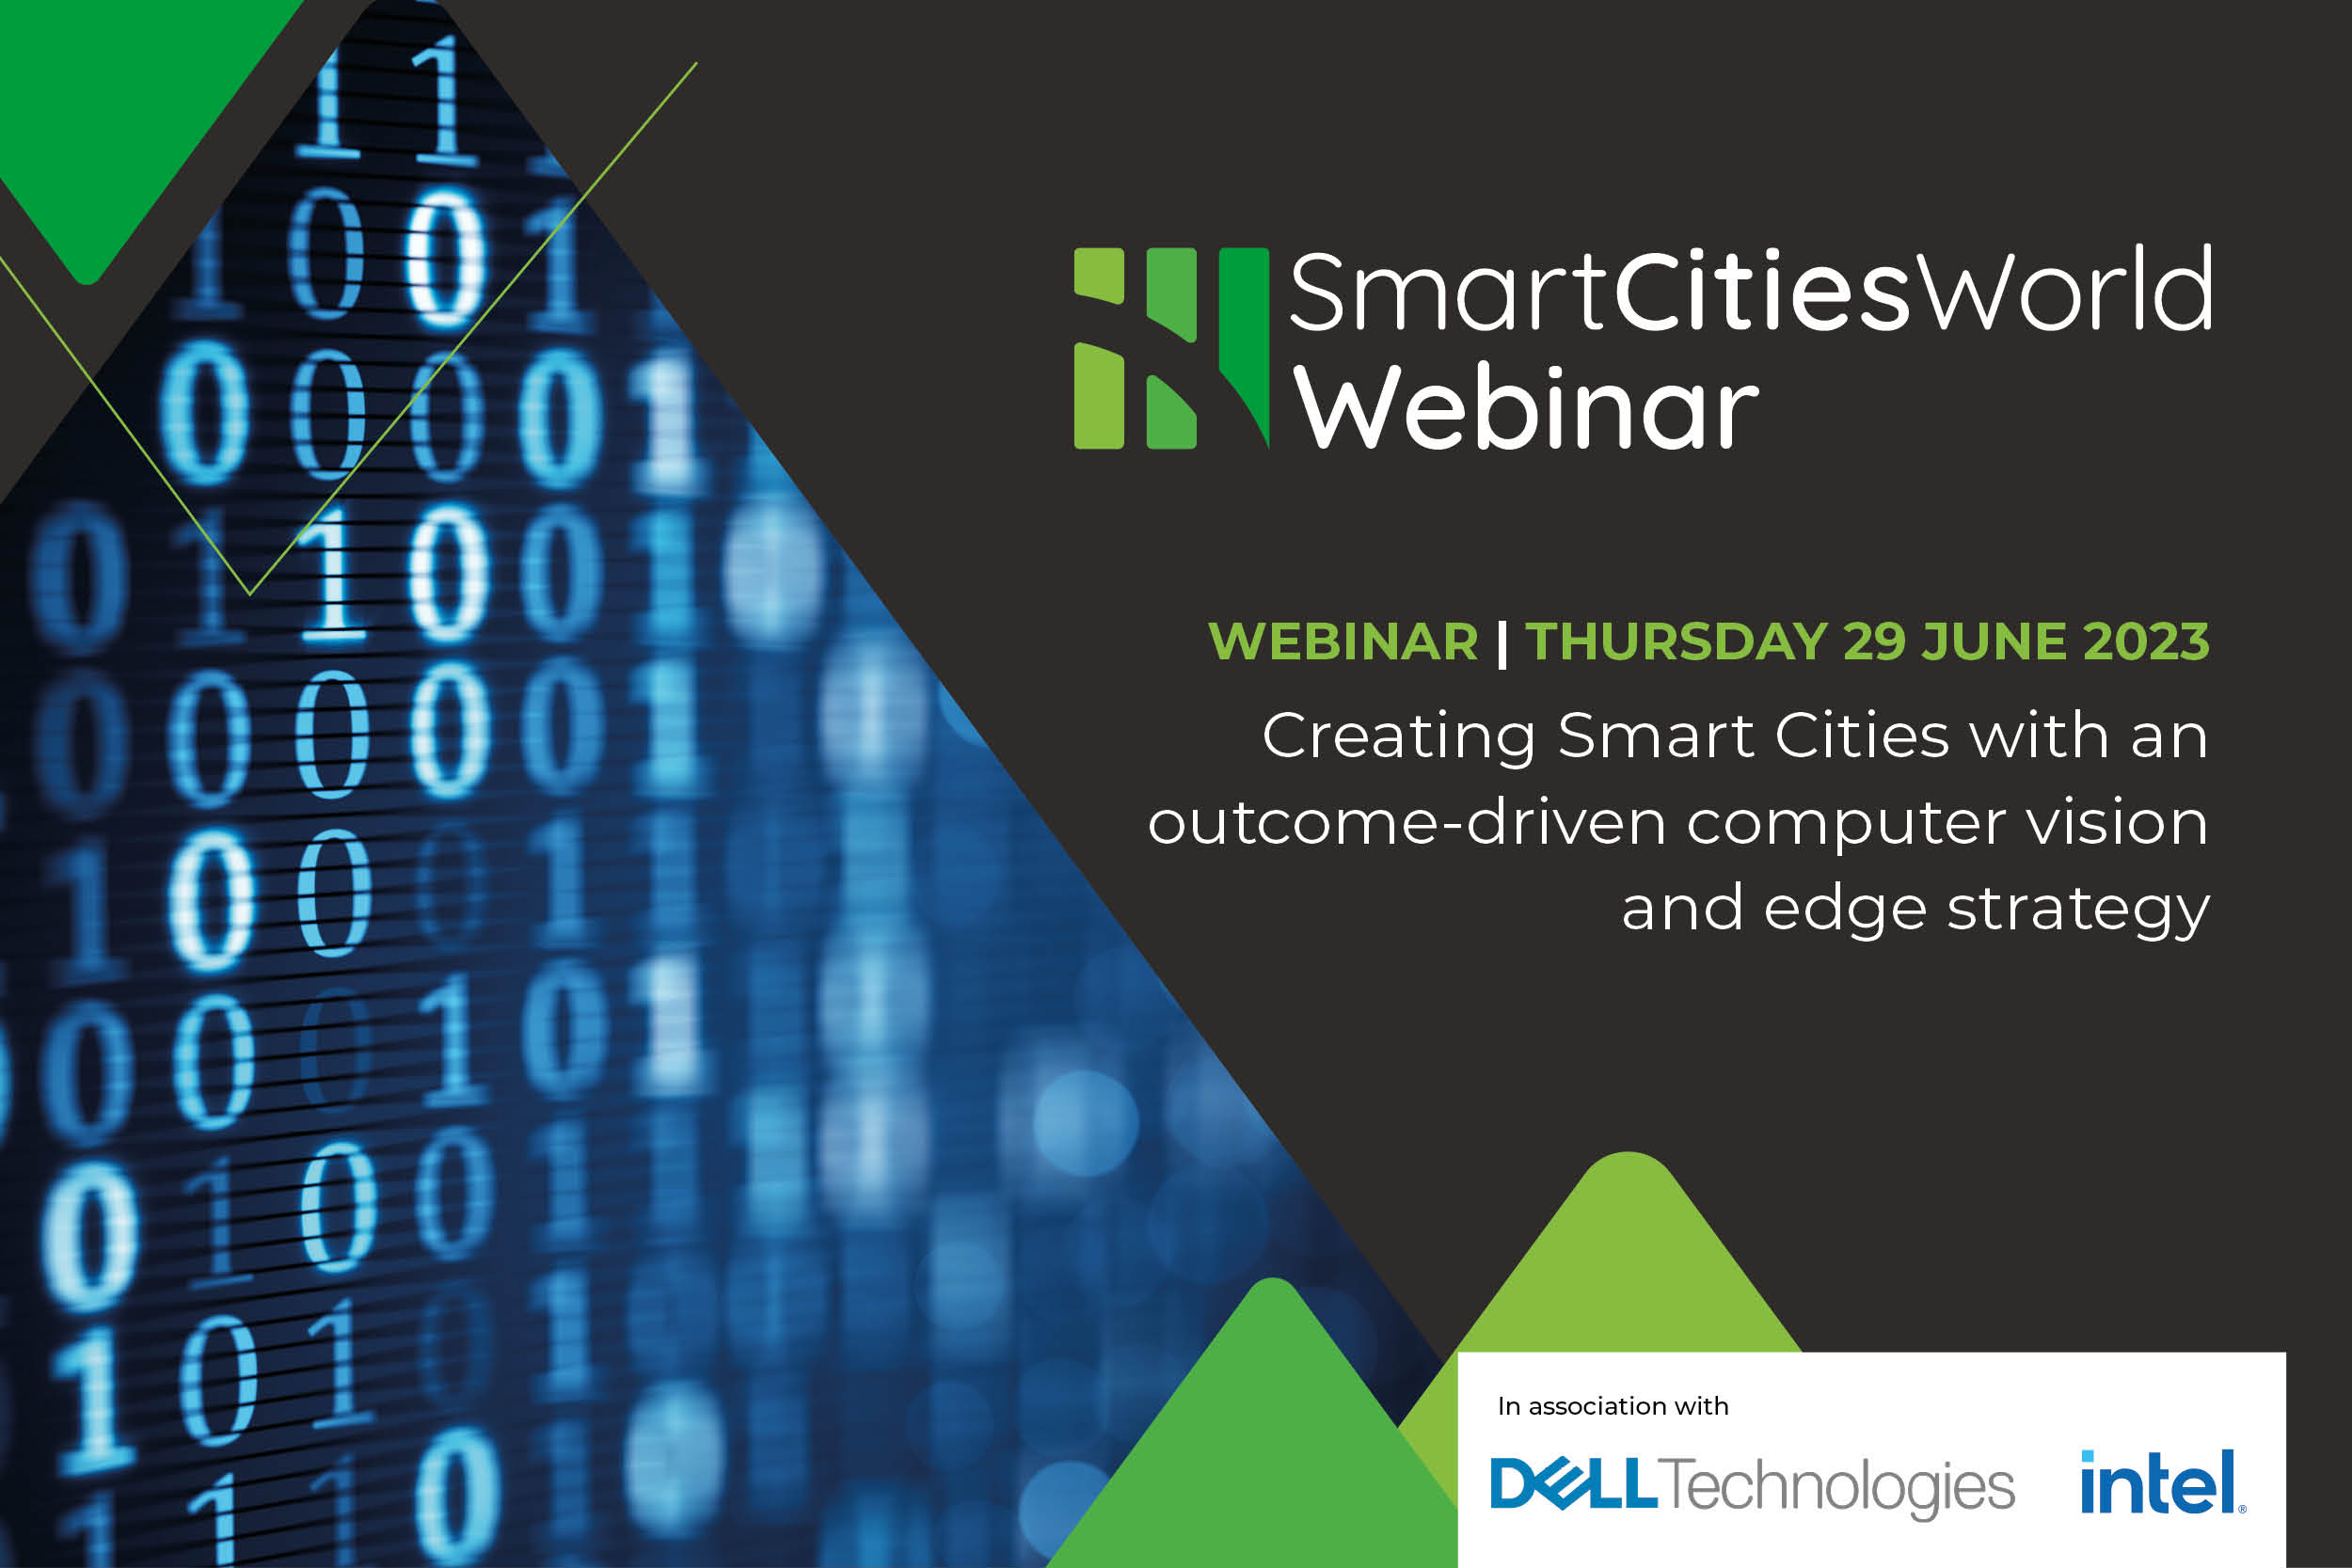 OnDemand Webinar: Creating Smart Cities with an outcome-driven computer vision and edge strategy